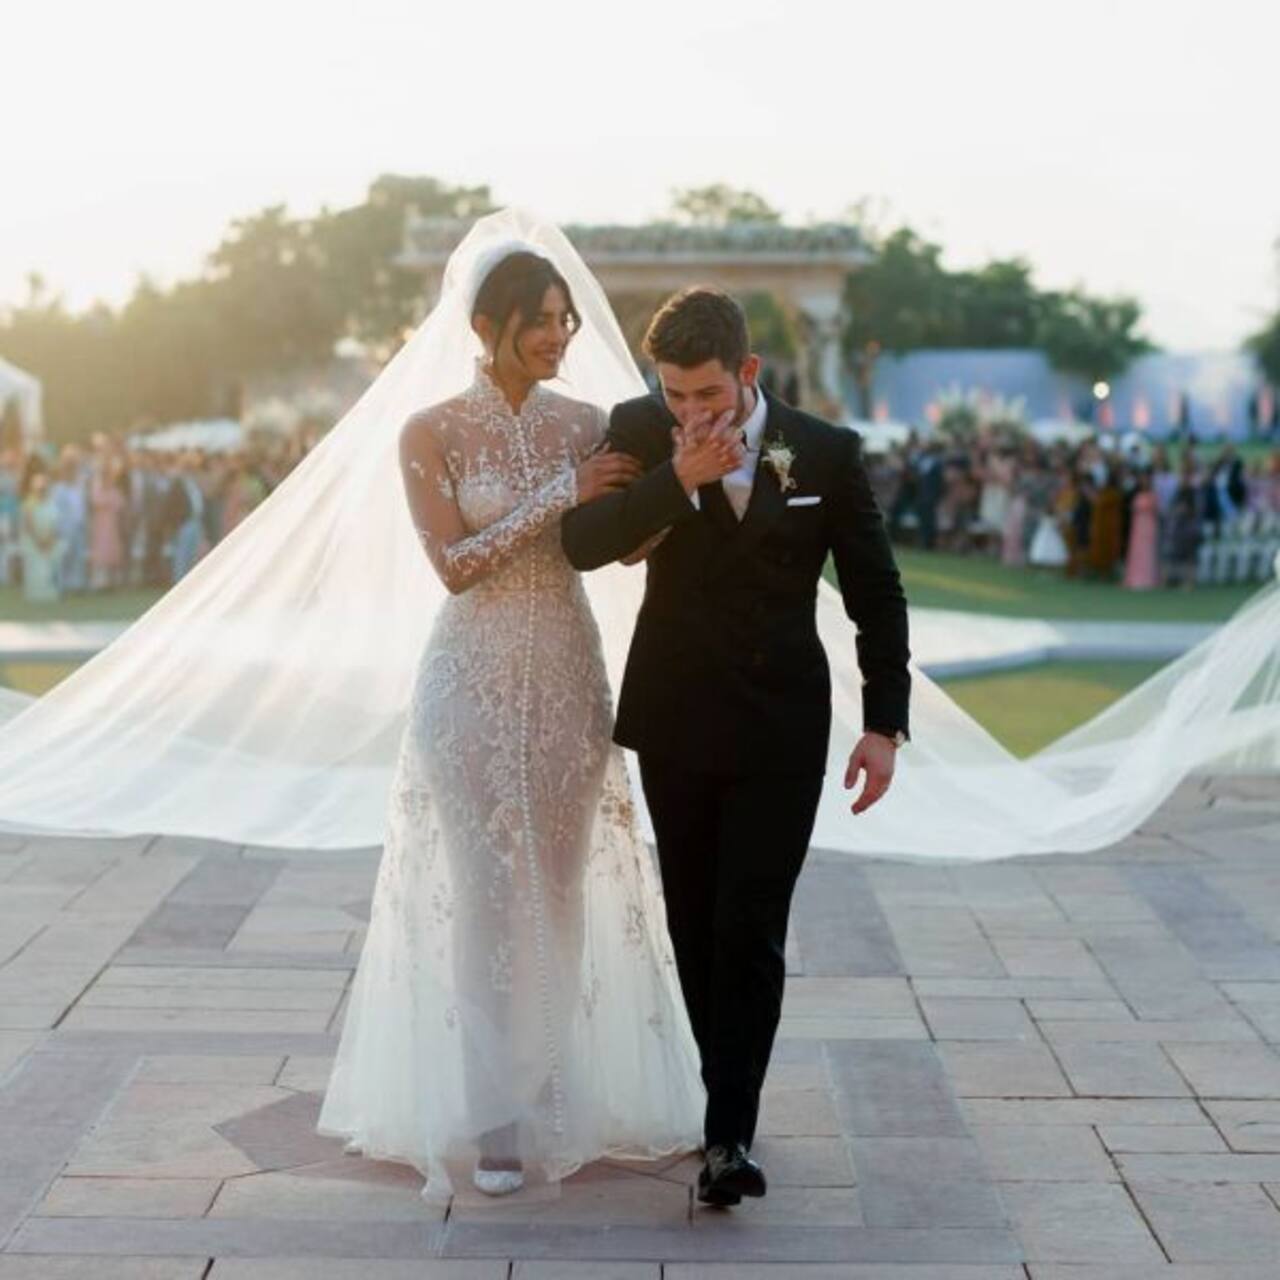 Twitterati is fuming over the article that slams newlywed Priyanka Chopra as a 'scam artist'